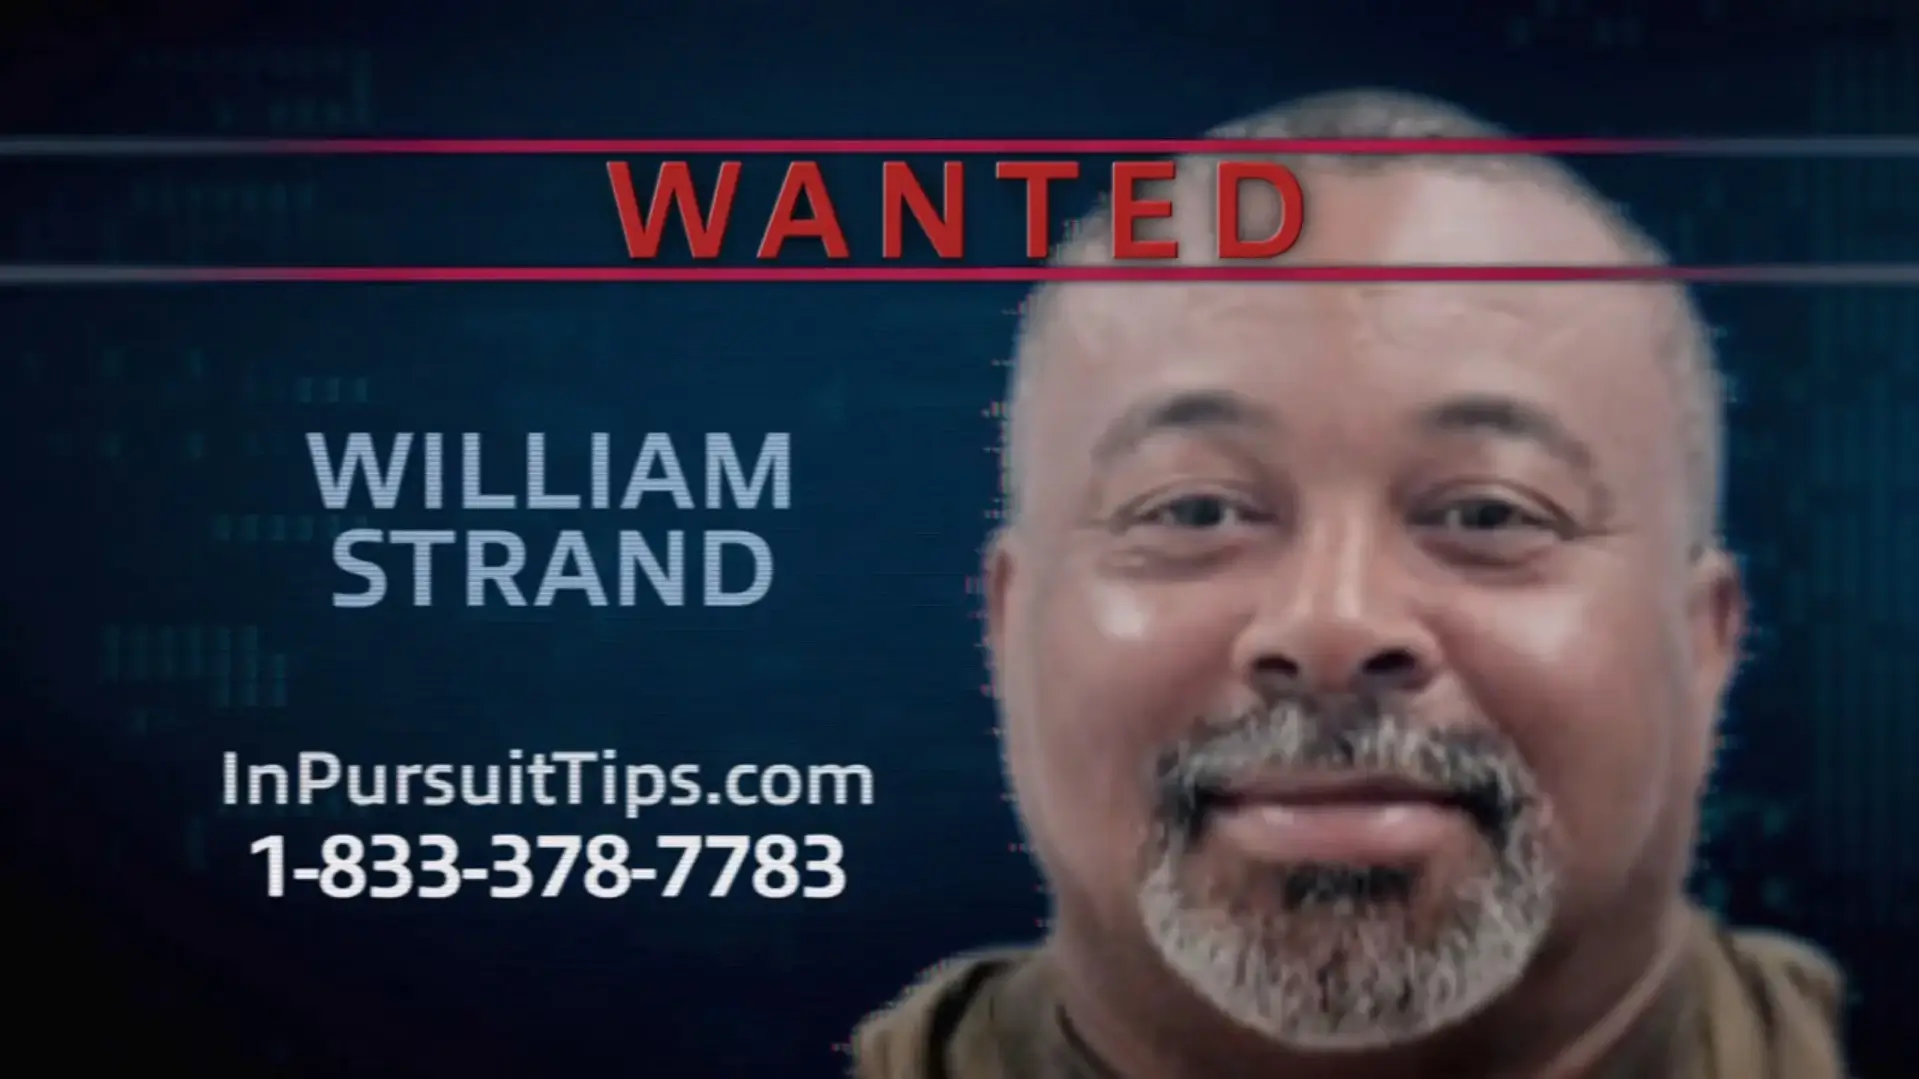 Where Is William Edward Strand Now